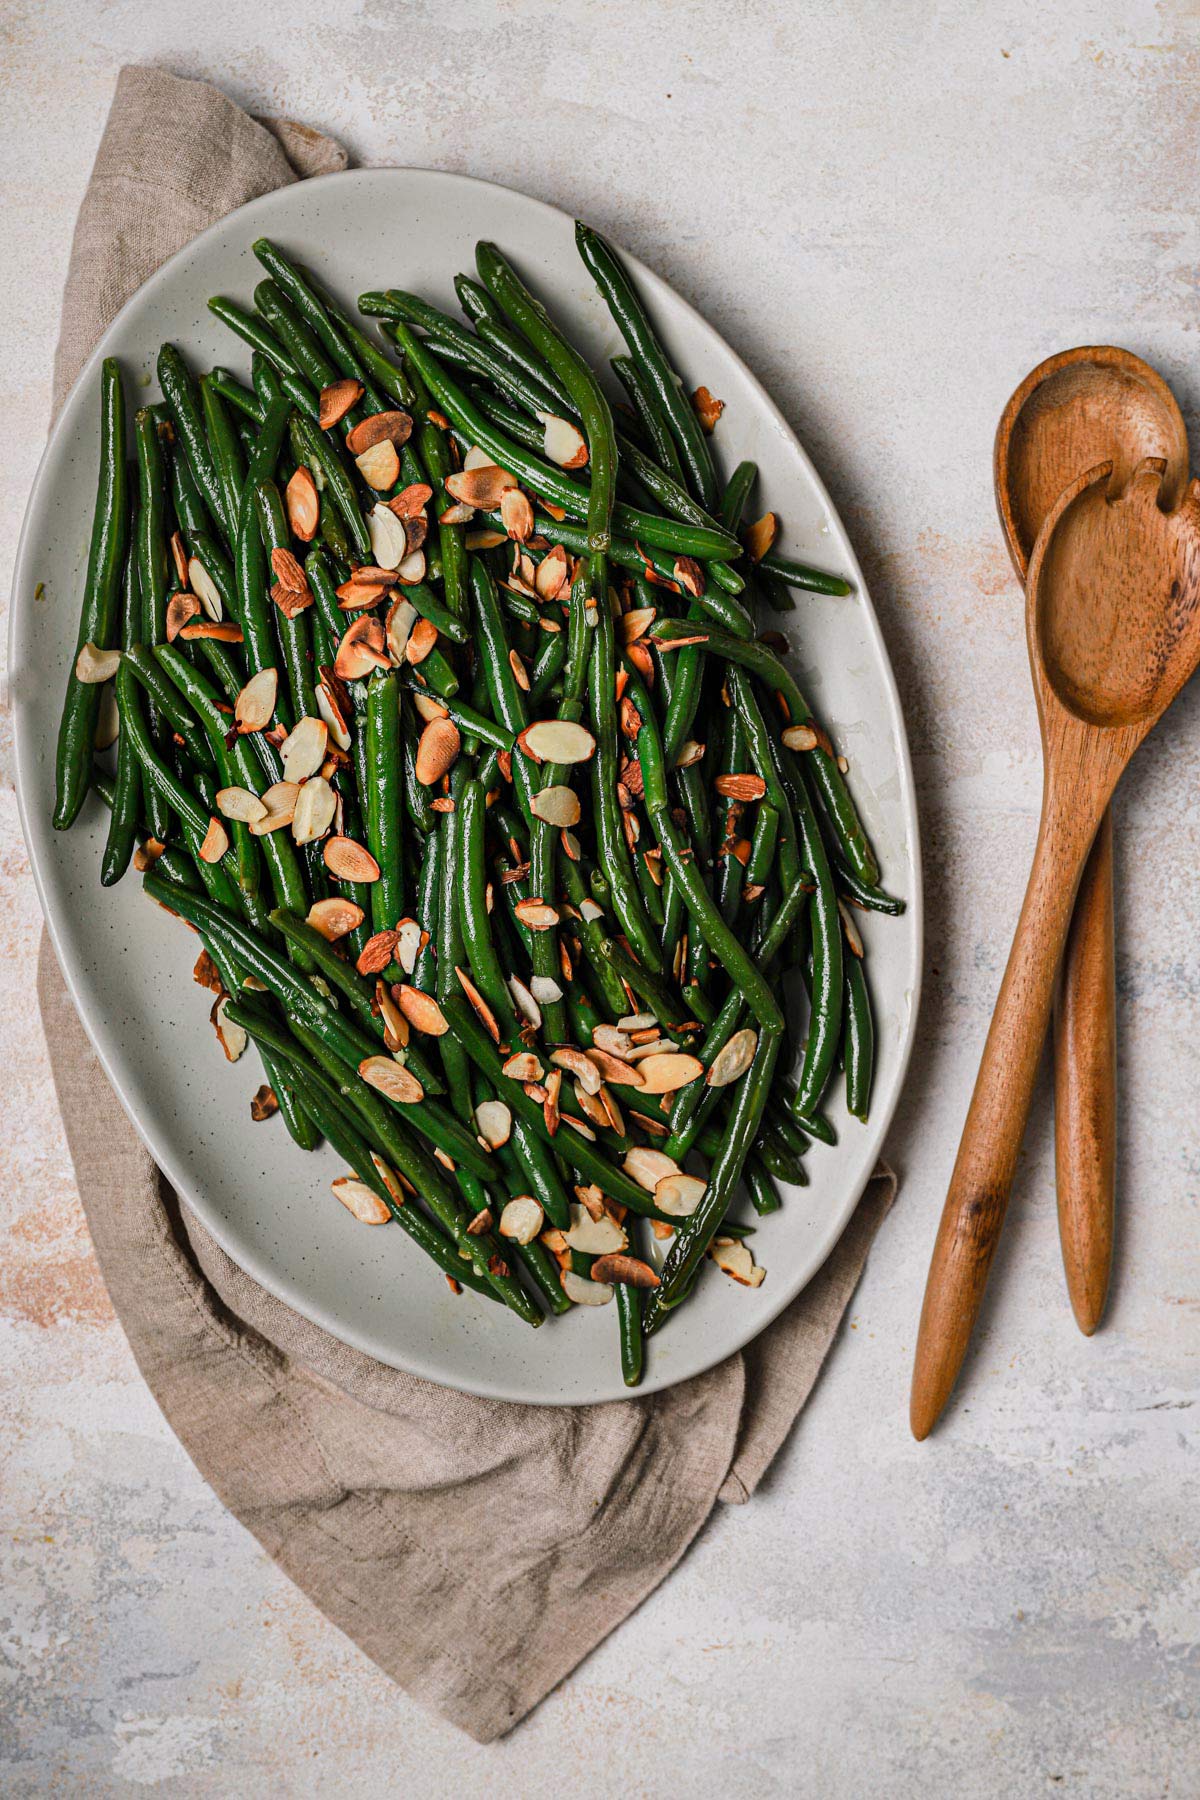 Green beans with toasted sliced almonds in a serving dish with wooden spoons nearby.